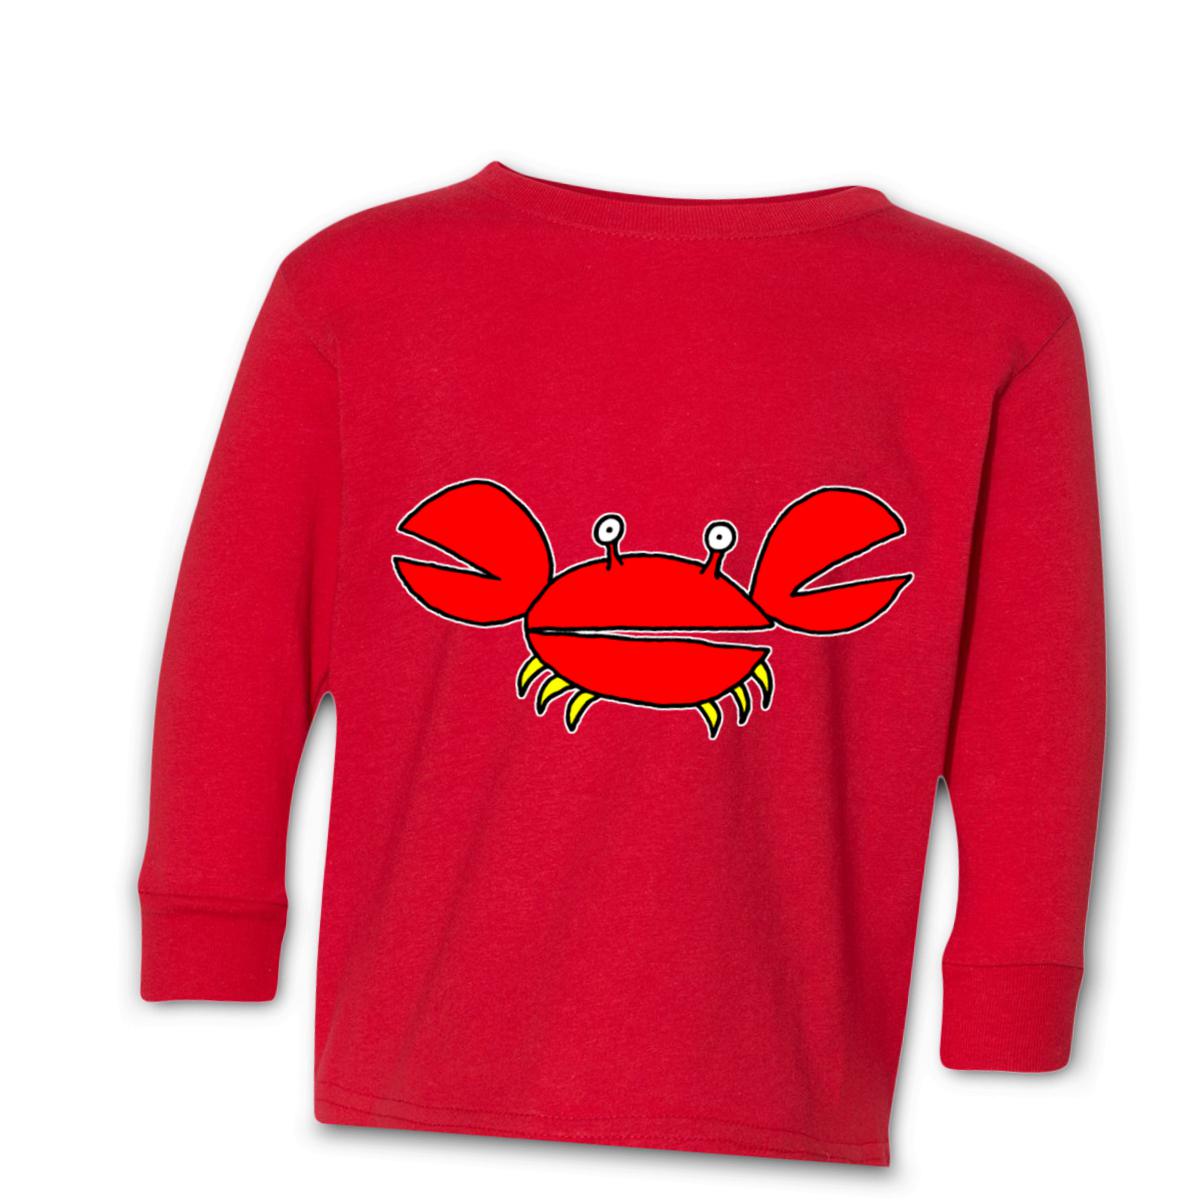 Crab Toddler Long Sleeve Tee 56T red